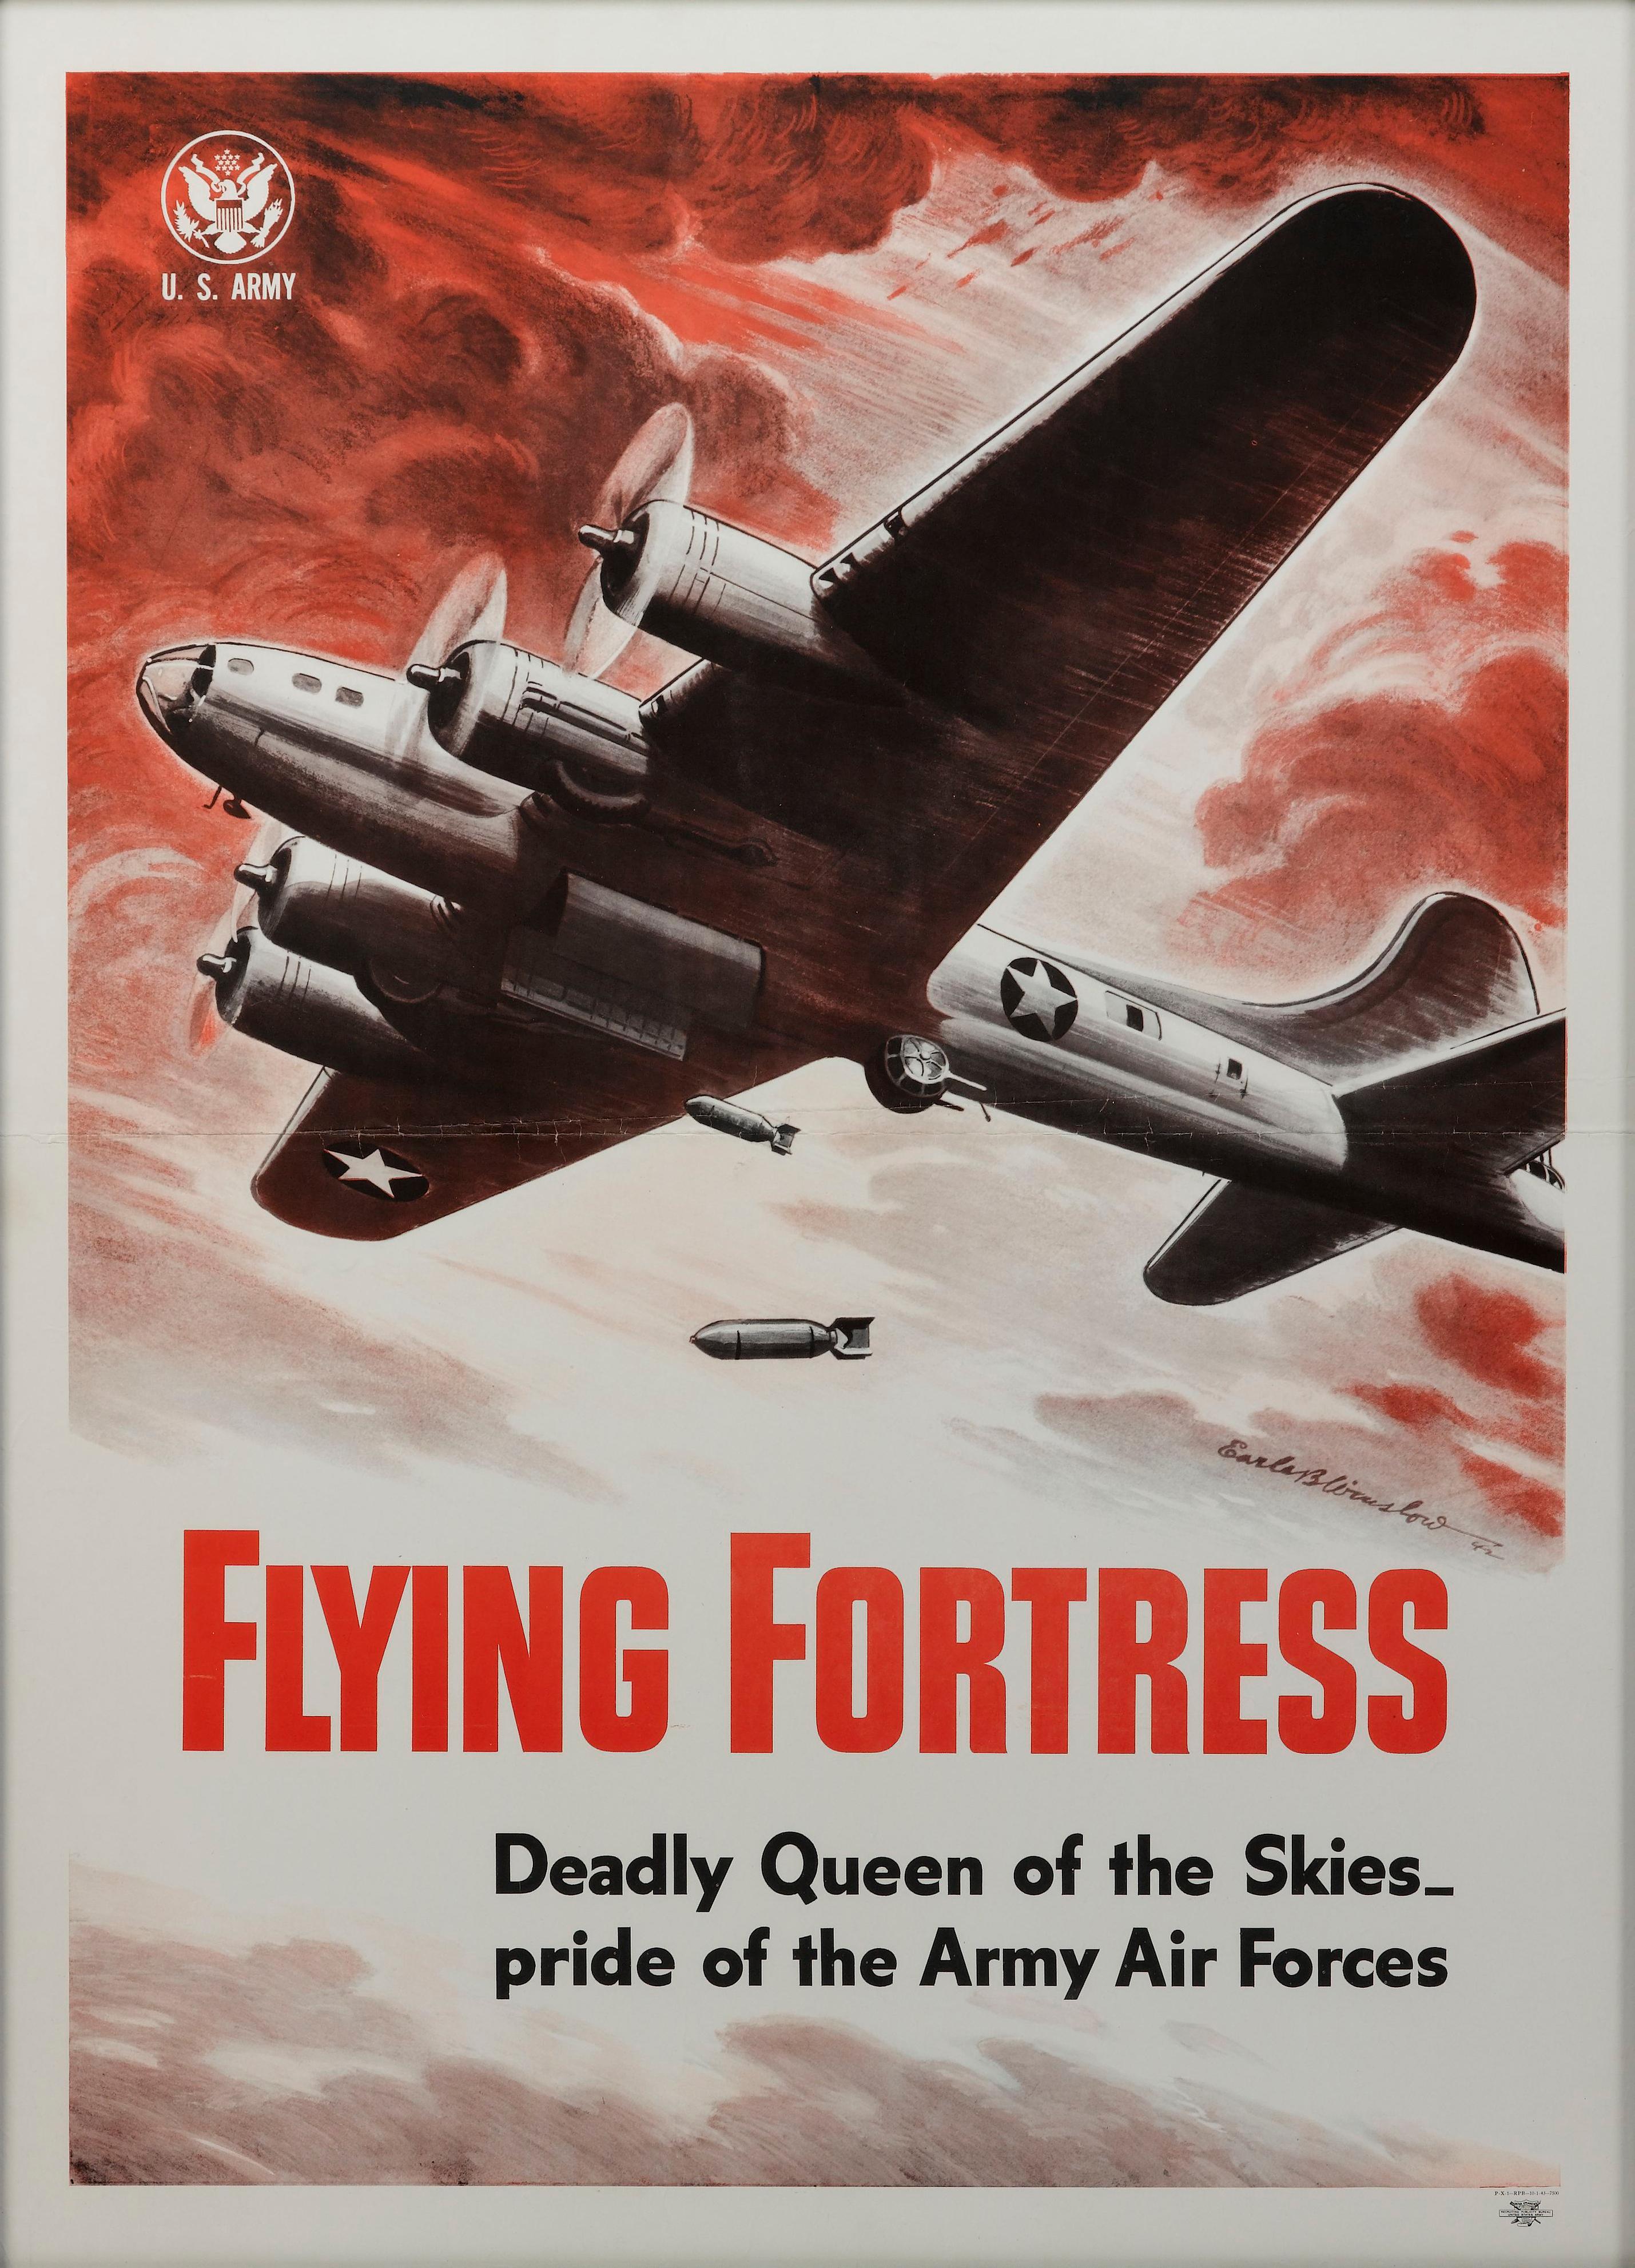 Presented is a vintage WWII U.S. Army poster of a B-17 Flying Fortress bomber plane. The poster was illustrated by Earle B. Winslow in 1942 and published by the Recruiting Publicity Bureau in 1943. The poster depicts a B-17 mid-battle as it drops